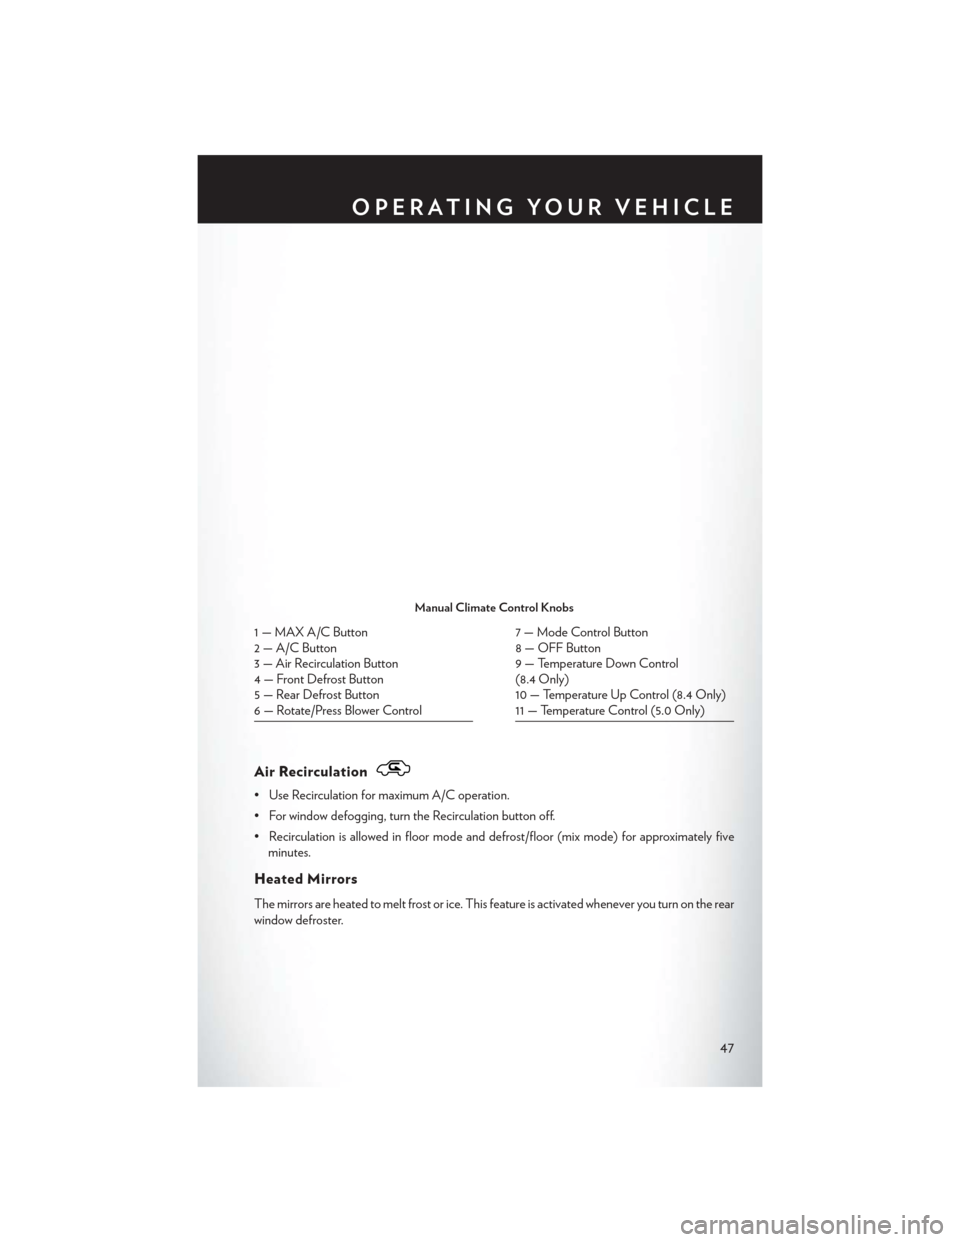 CHRYSLER 200 2015 2.G User Guide Air Recirculation
• Use Recirculation for maximum A/C operation.
• For window defogging, turn the Recirculation button off.
• Recirculation is allowed in floor mode and defrost/floor (mix mode) 